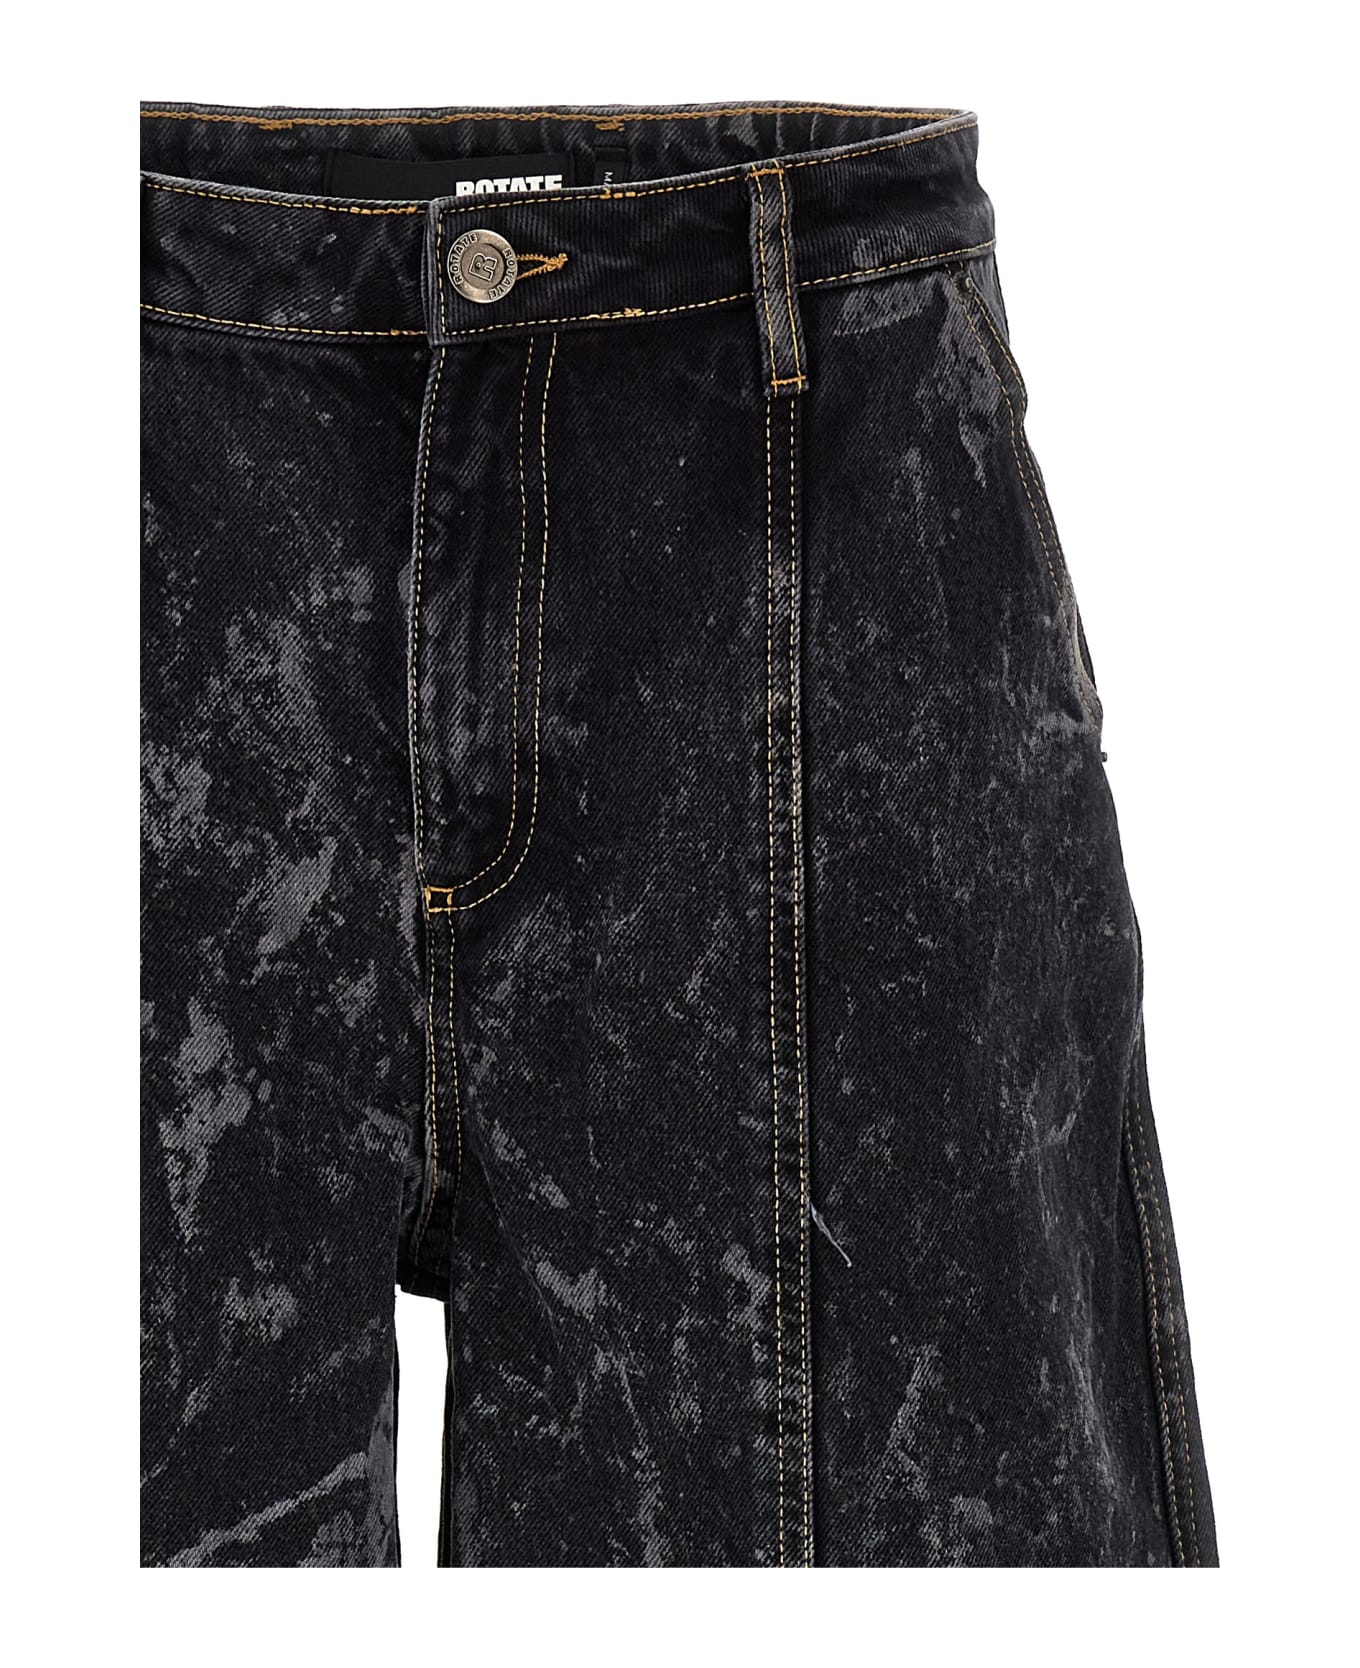 Rotate by Birger Christensen 'washed Twill Wide' Jeans - Black   デニム